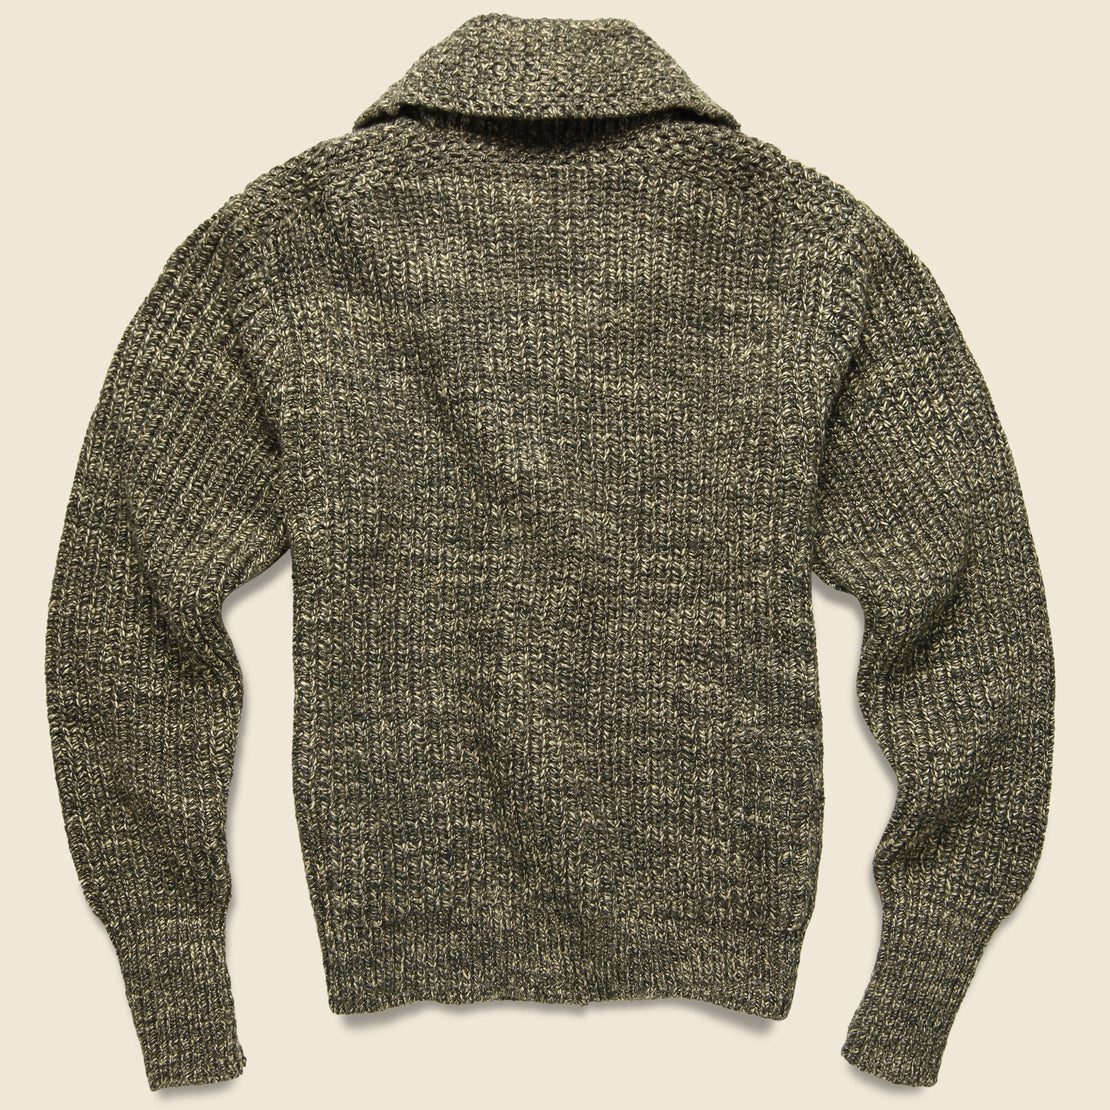 Shawl Collar Cardigan - Olive/Tan - RRL - STAG Provisions - Tops - Sweater